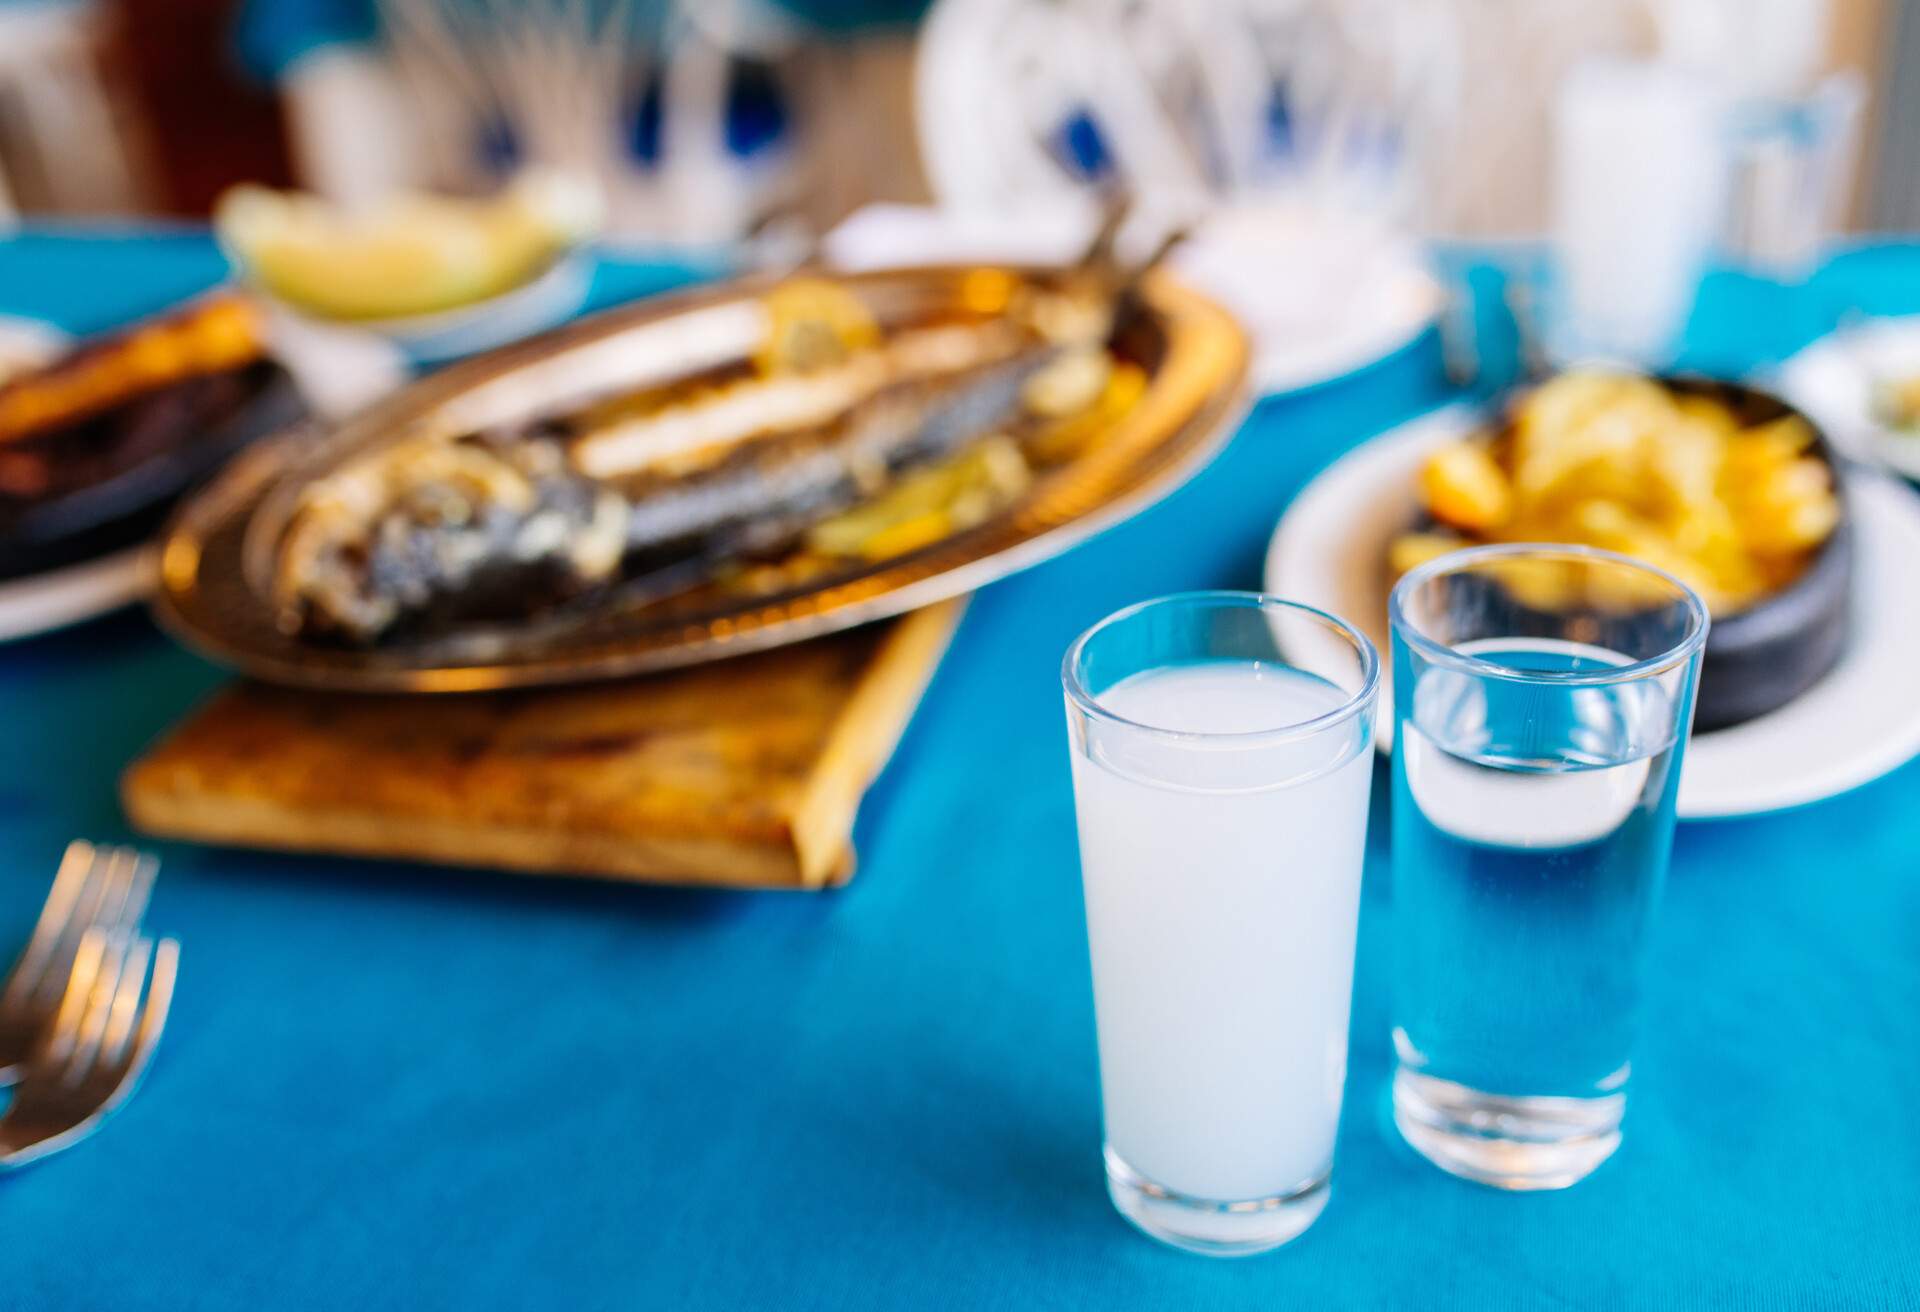 Greek restaurant table and food dinner cuisine culture from top view. Traditional Greek ouzo with grilled or fried fish and appetizers on dinner table at restaurant.